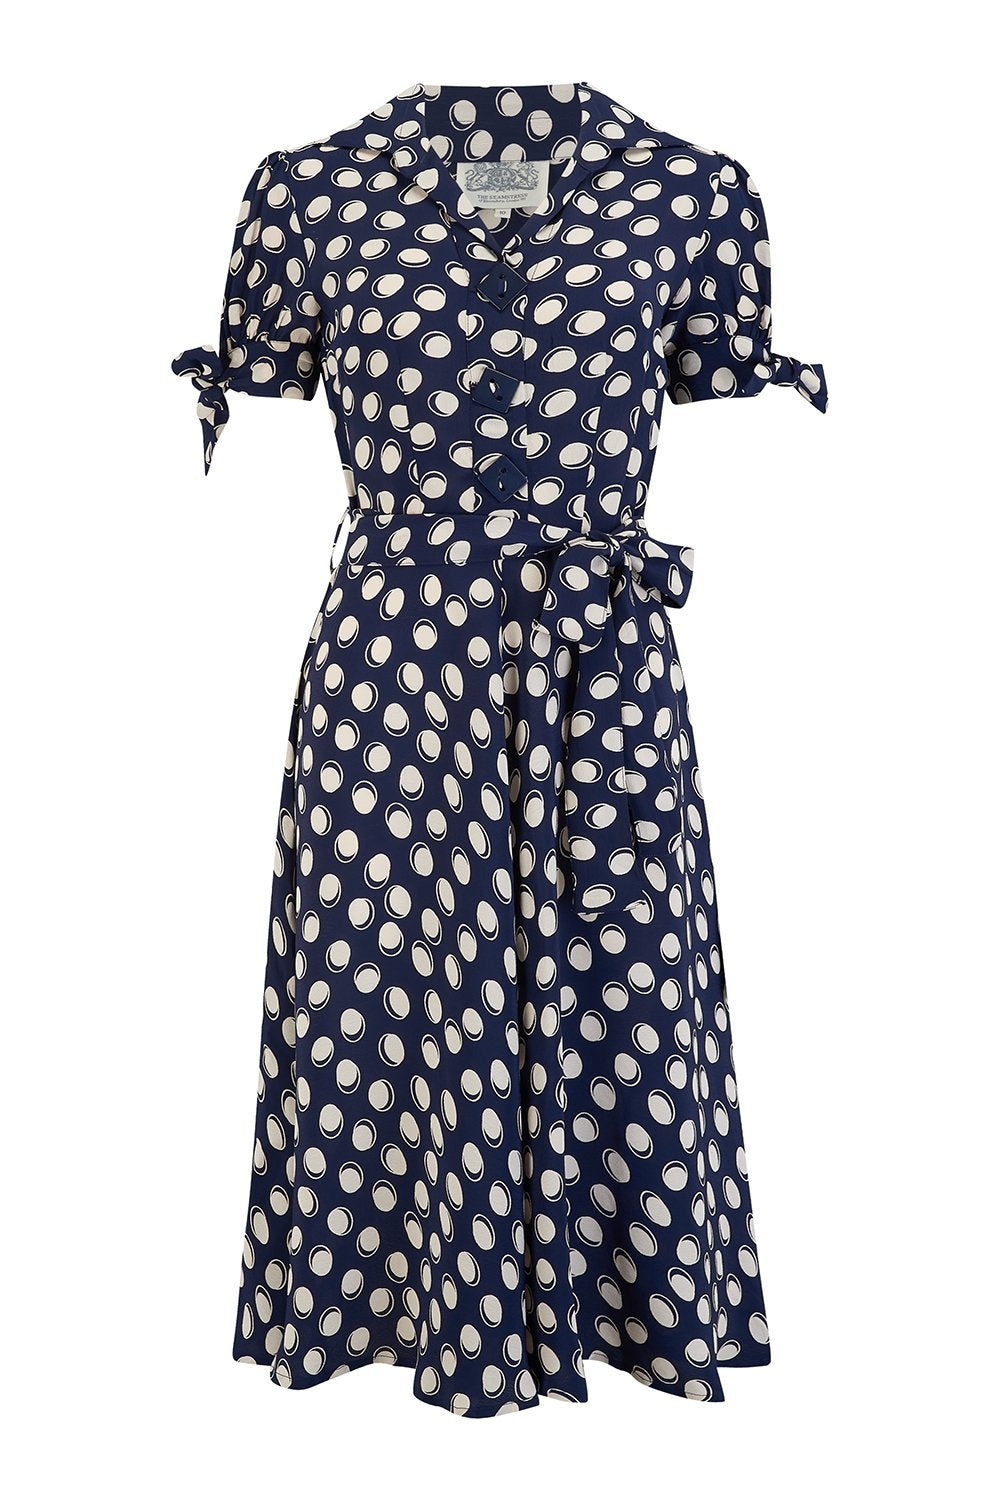 "Iris" Tea Dress in Navy Moonshine Print, Classic & Authentic 1940s Style at its Best - True and authentic vintage style clothing, inspired by the Classic styles of CC41 , WW2 and the fun 1950s RocknRoll era, for everyday wear plus events like Goodwood Revival, Twinwood Festival and Viva Las Vegas Rockabilly Weekend Rock n Romance The Seamstress Of Bloomsbury